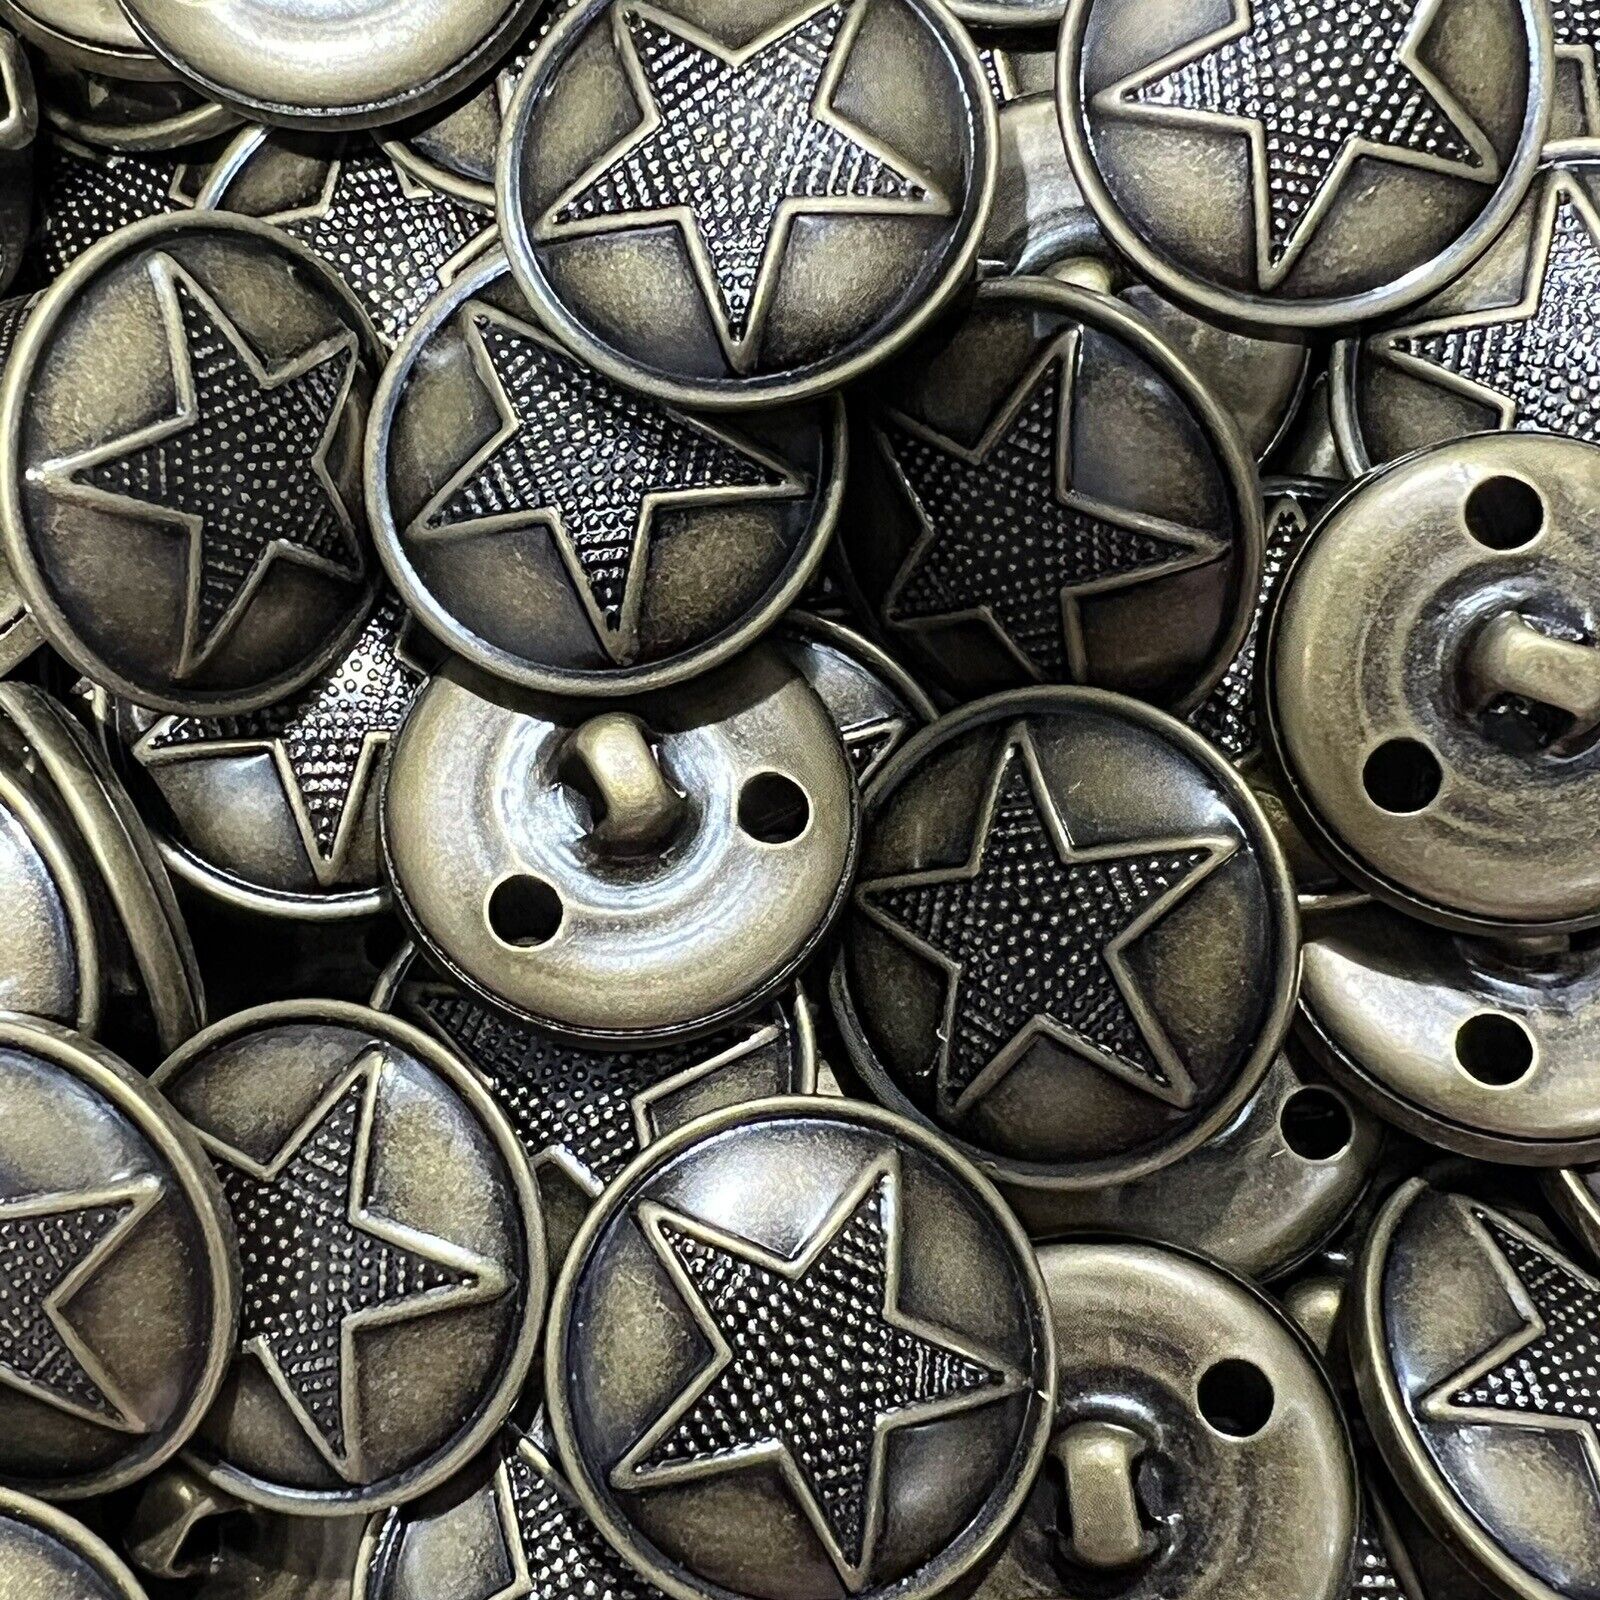 Old Brass Military Star Design Stamped/Embossed Metal Button 15,20,23,25mm Shank